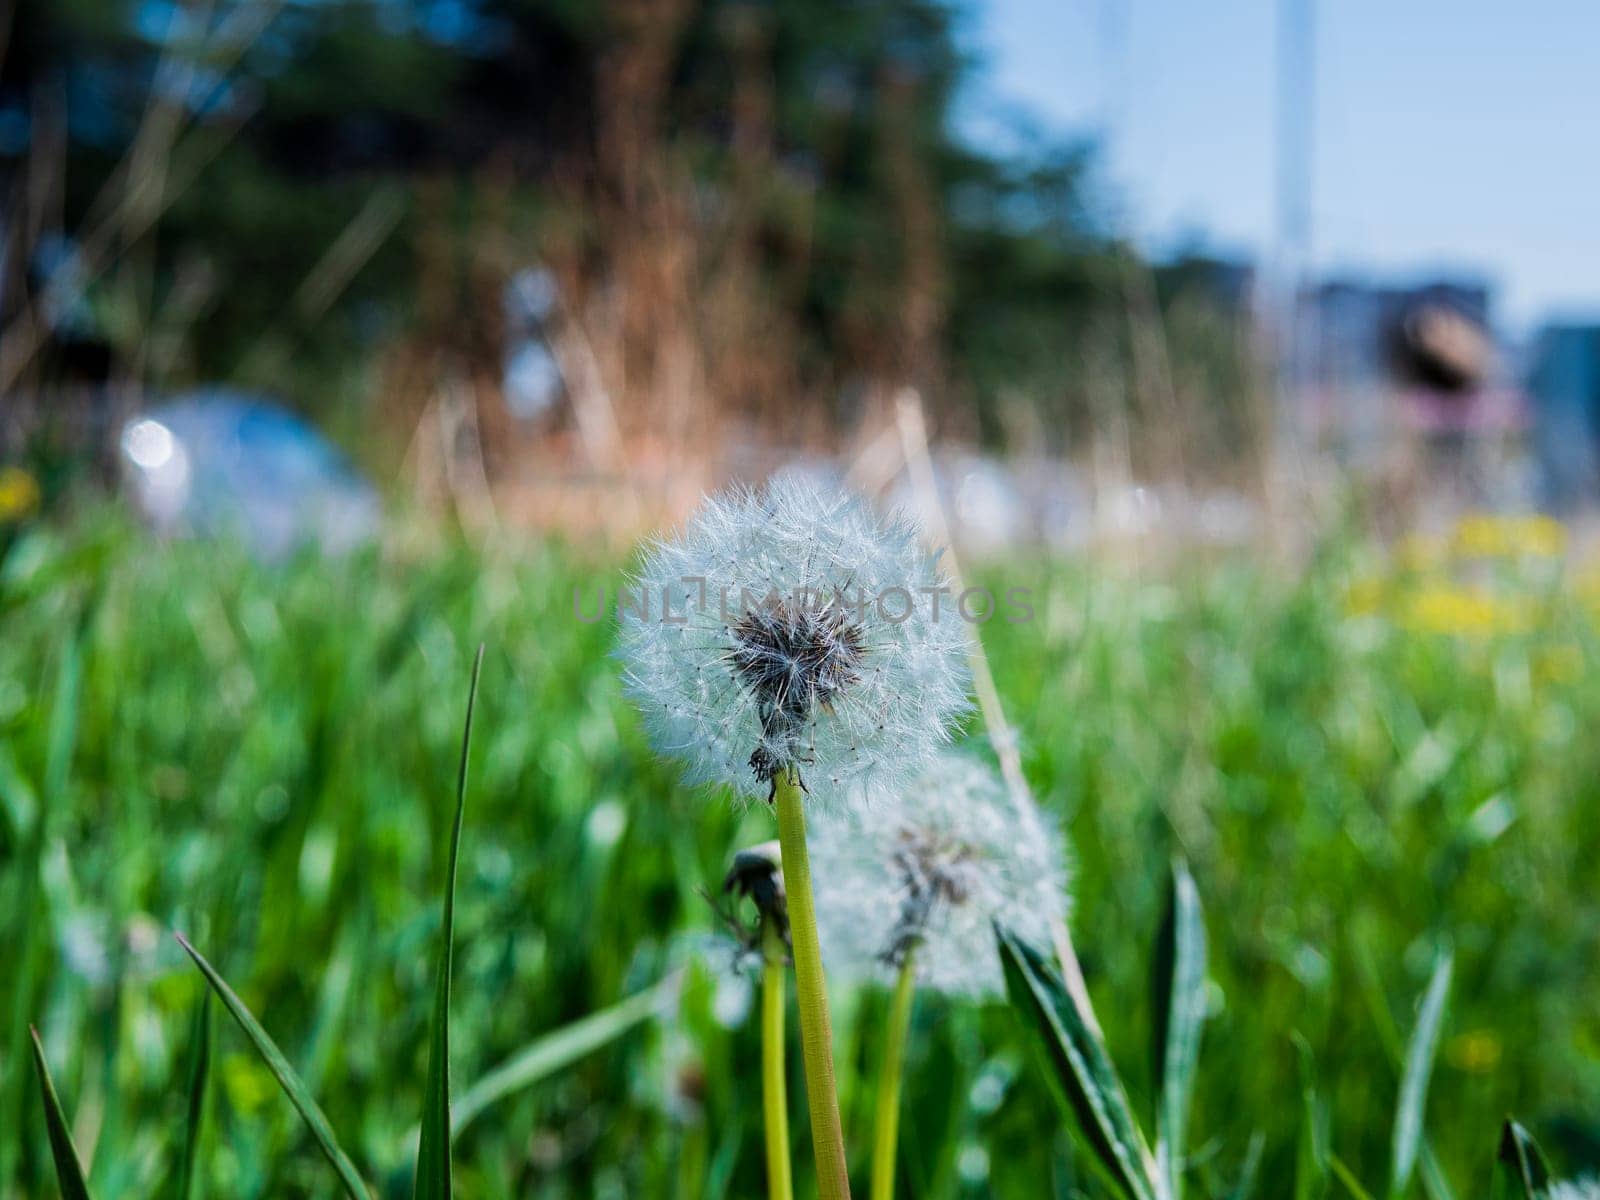 A dandelion, a flower in the grass family, is growing in a grassland meadow under the blue sky, creating a beautiful natural landscape